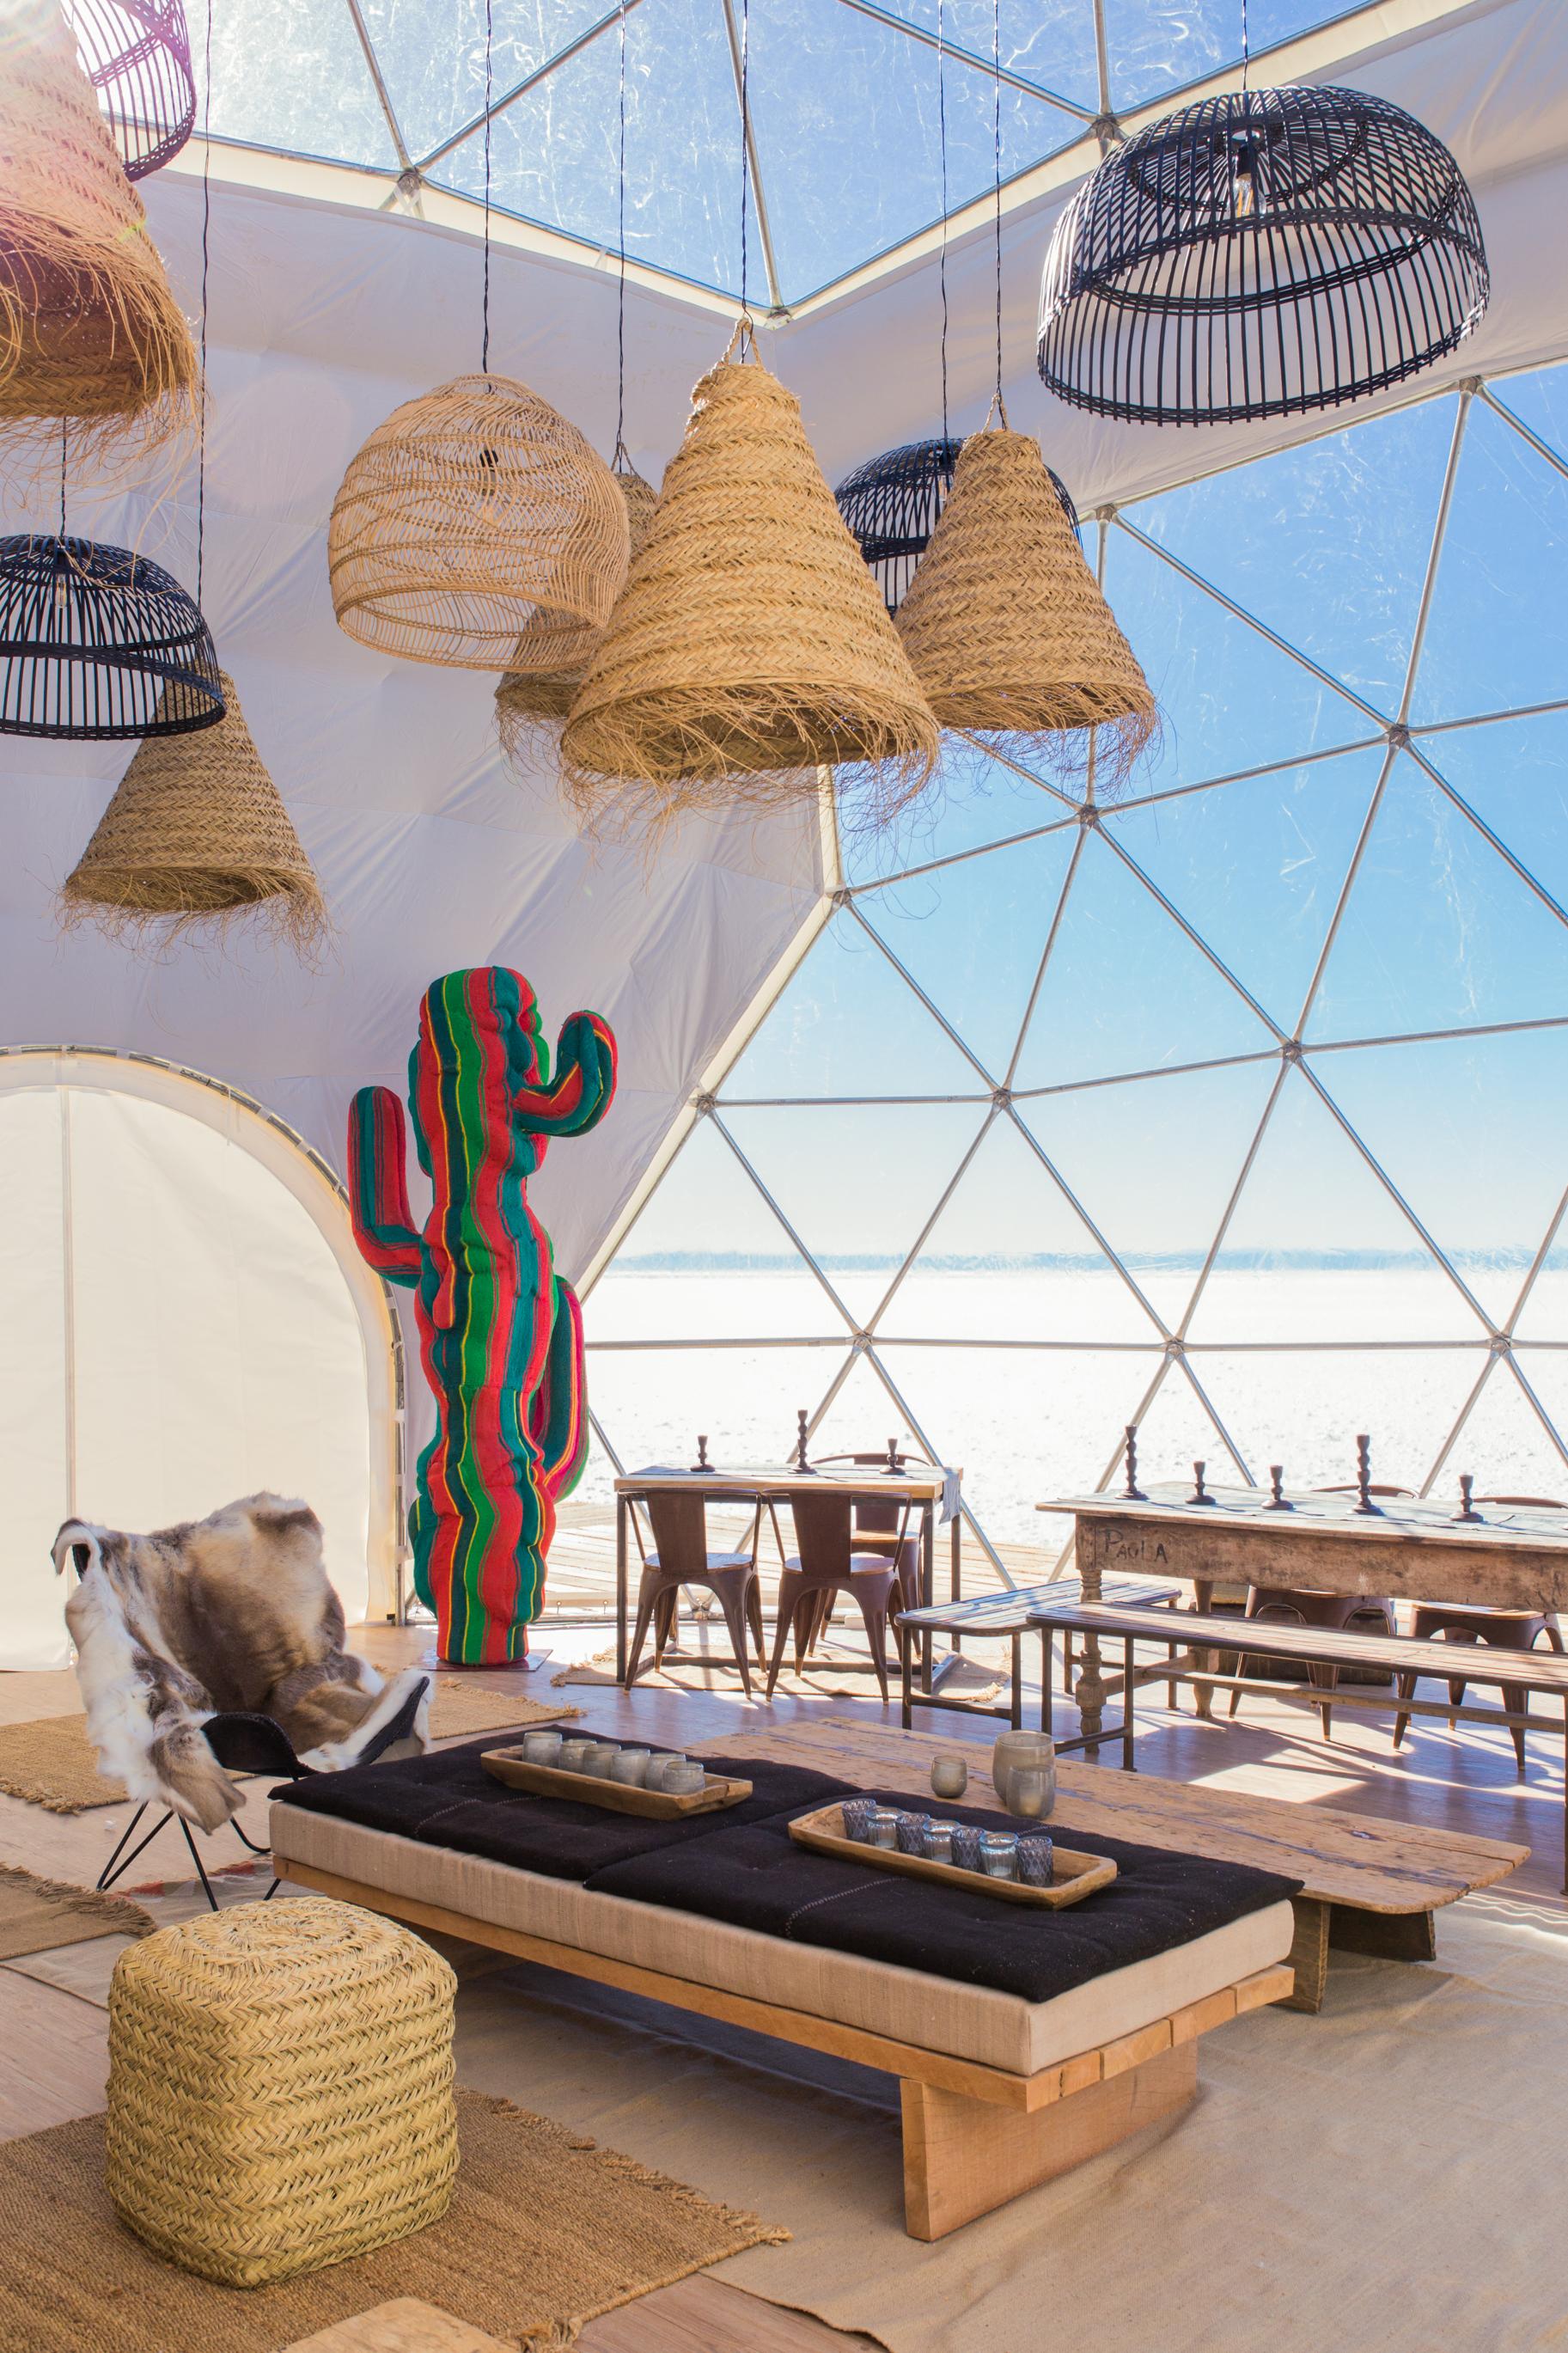 Kachi Lodge, the ultimate in salt flats glamping.